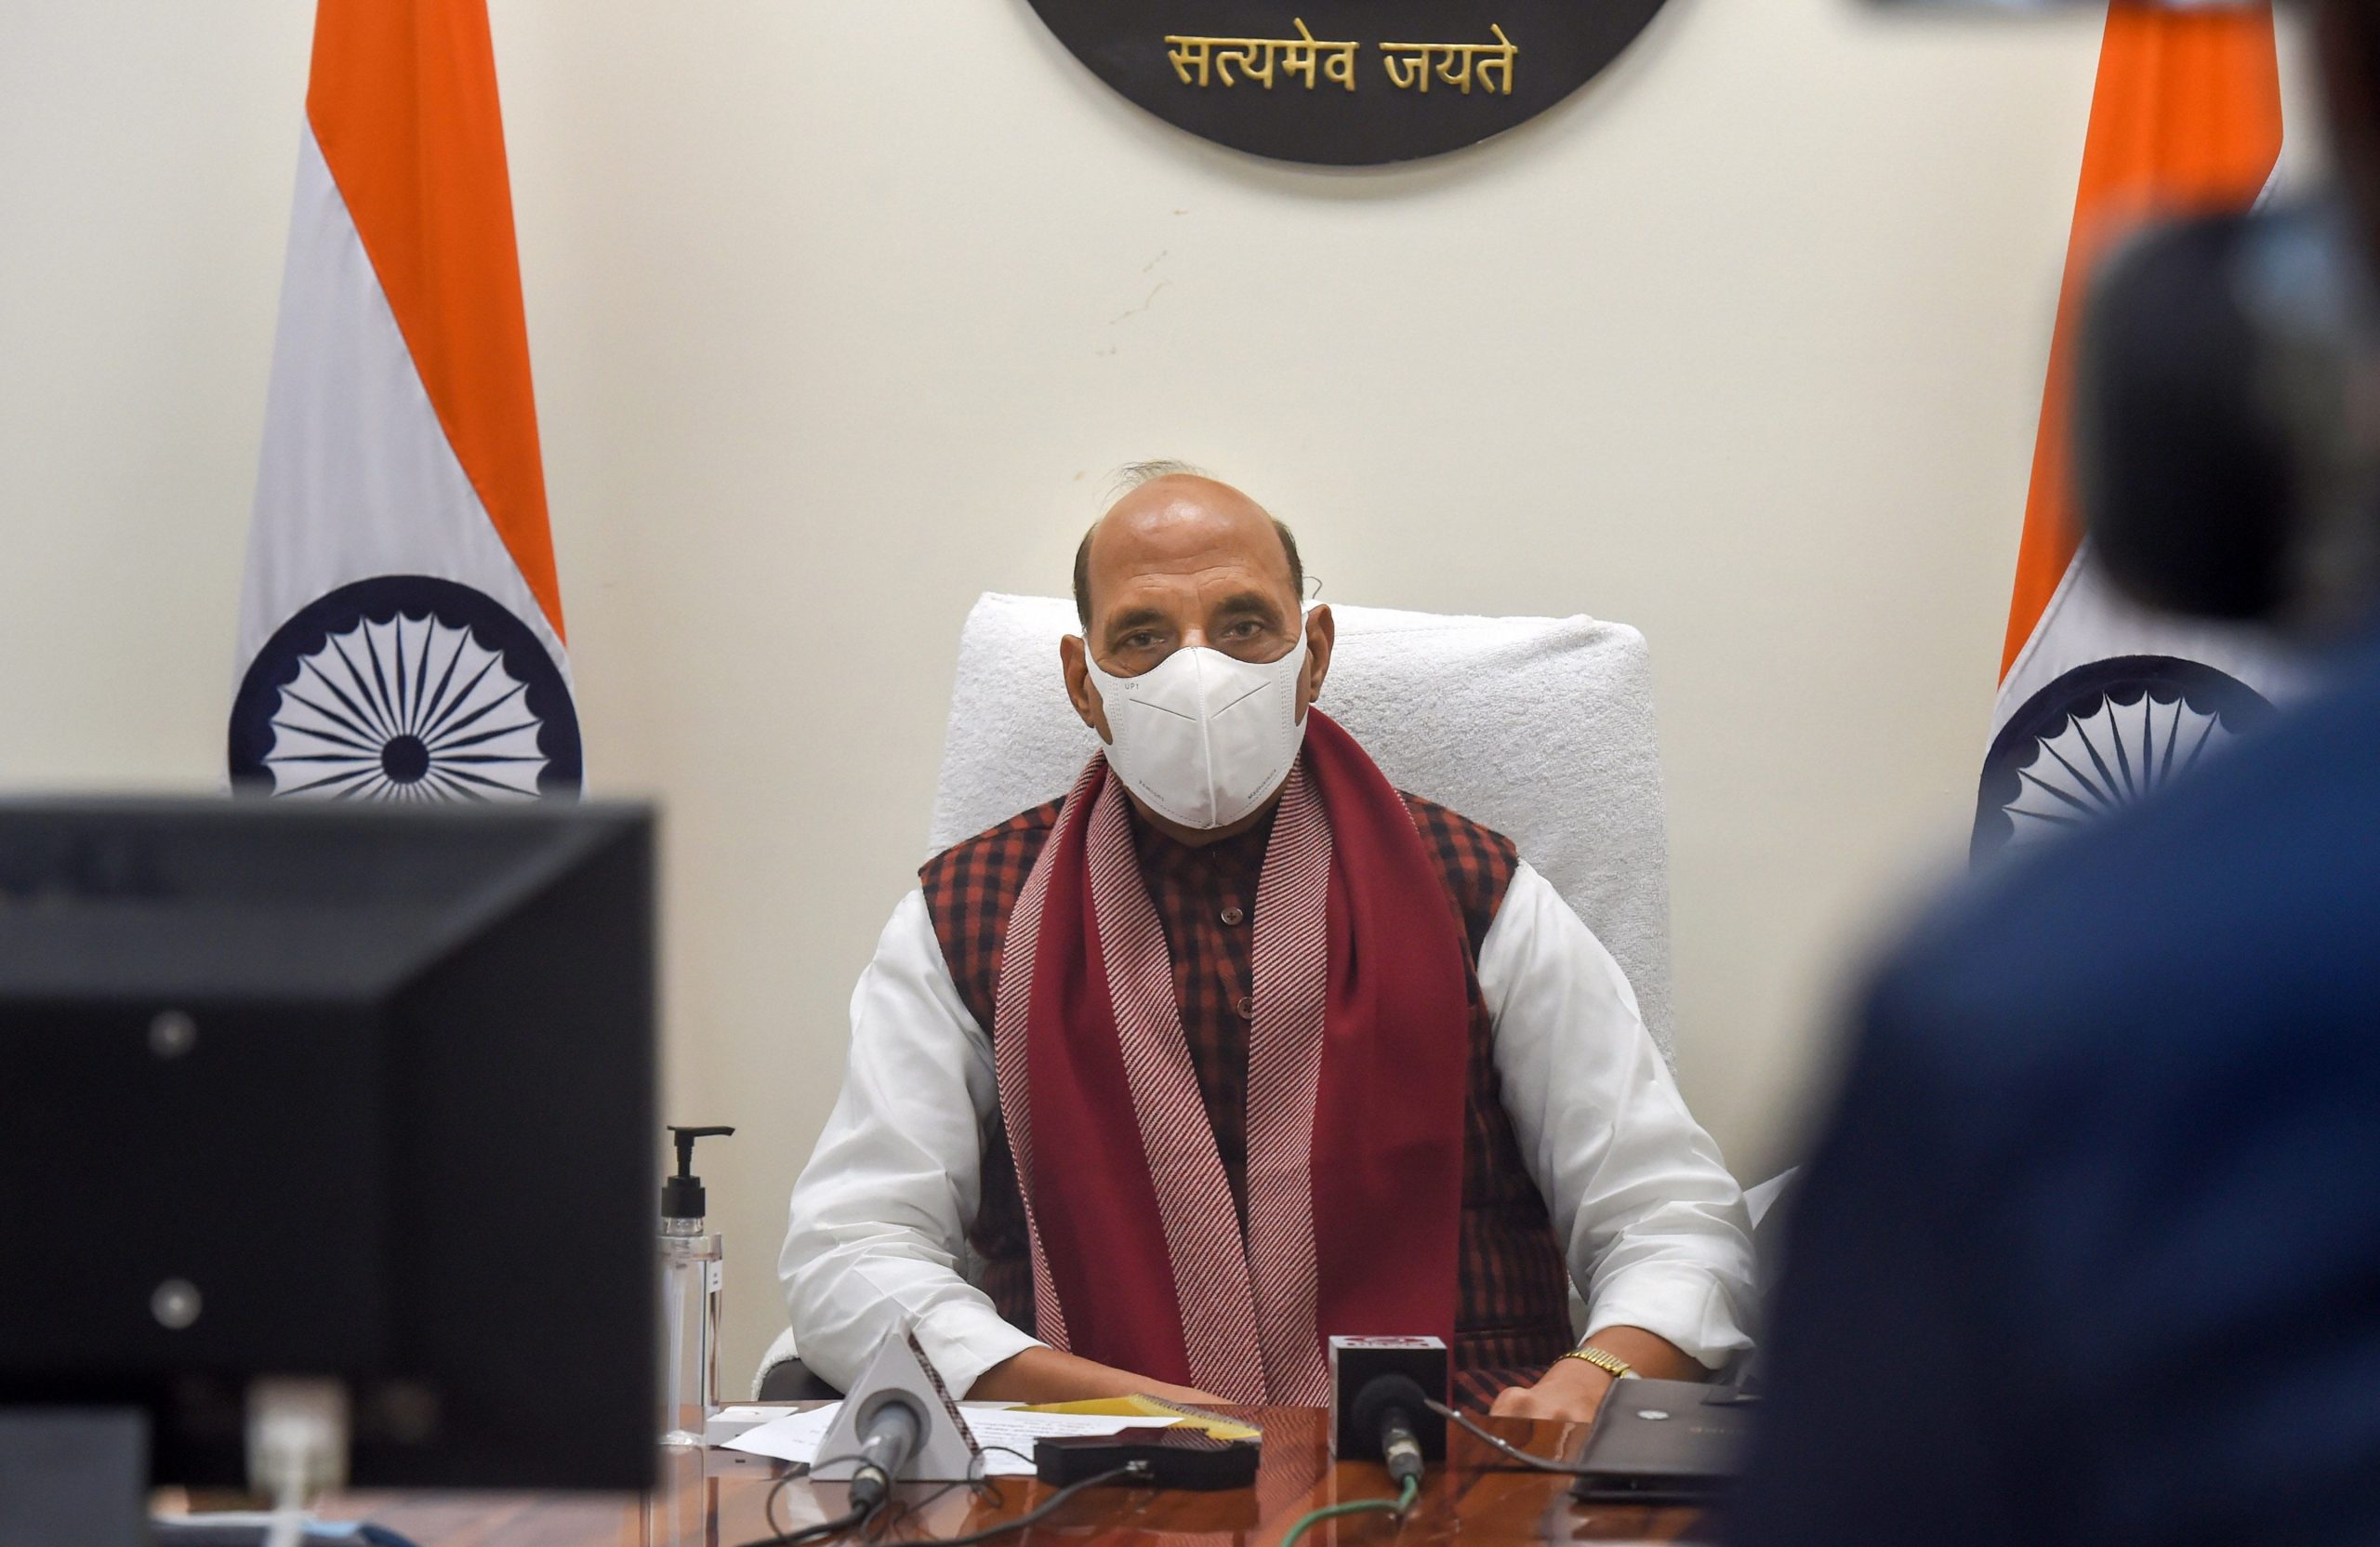 Defence Minister of India Rajnath Singh tests positive for COVID-19